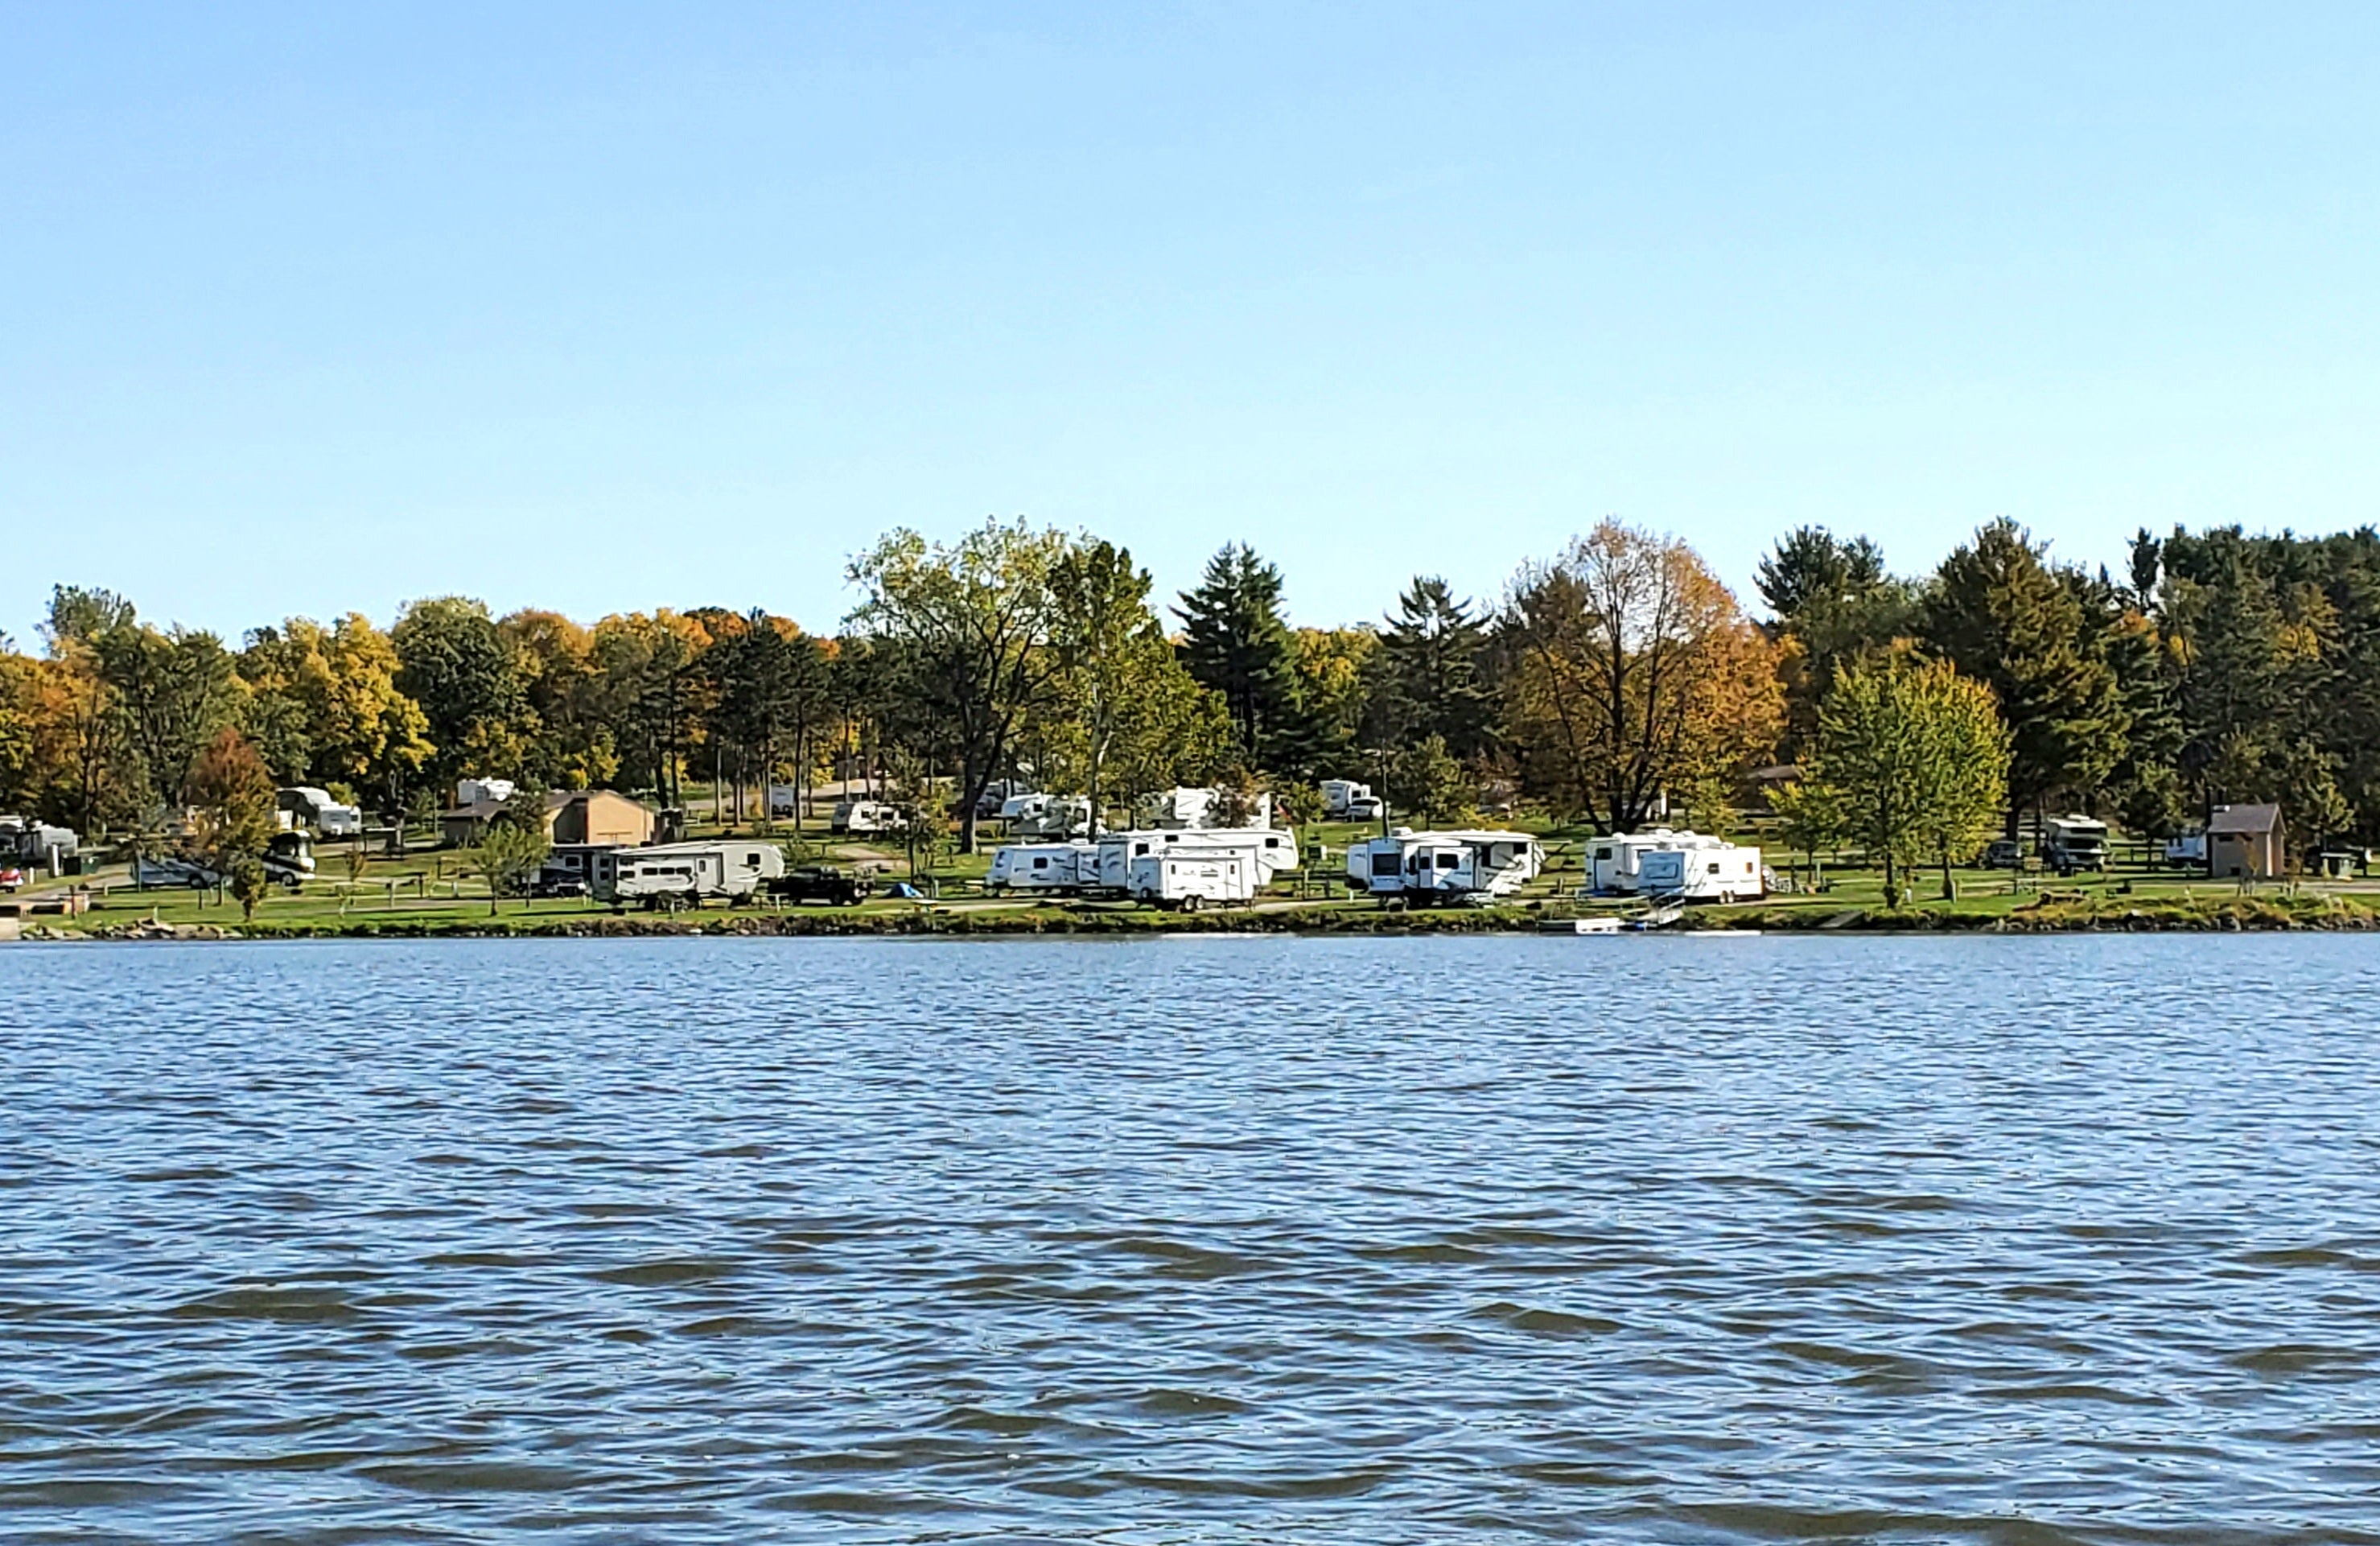 View of the campground from the water